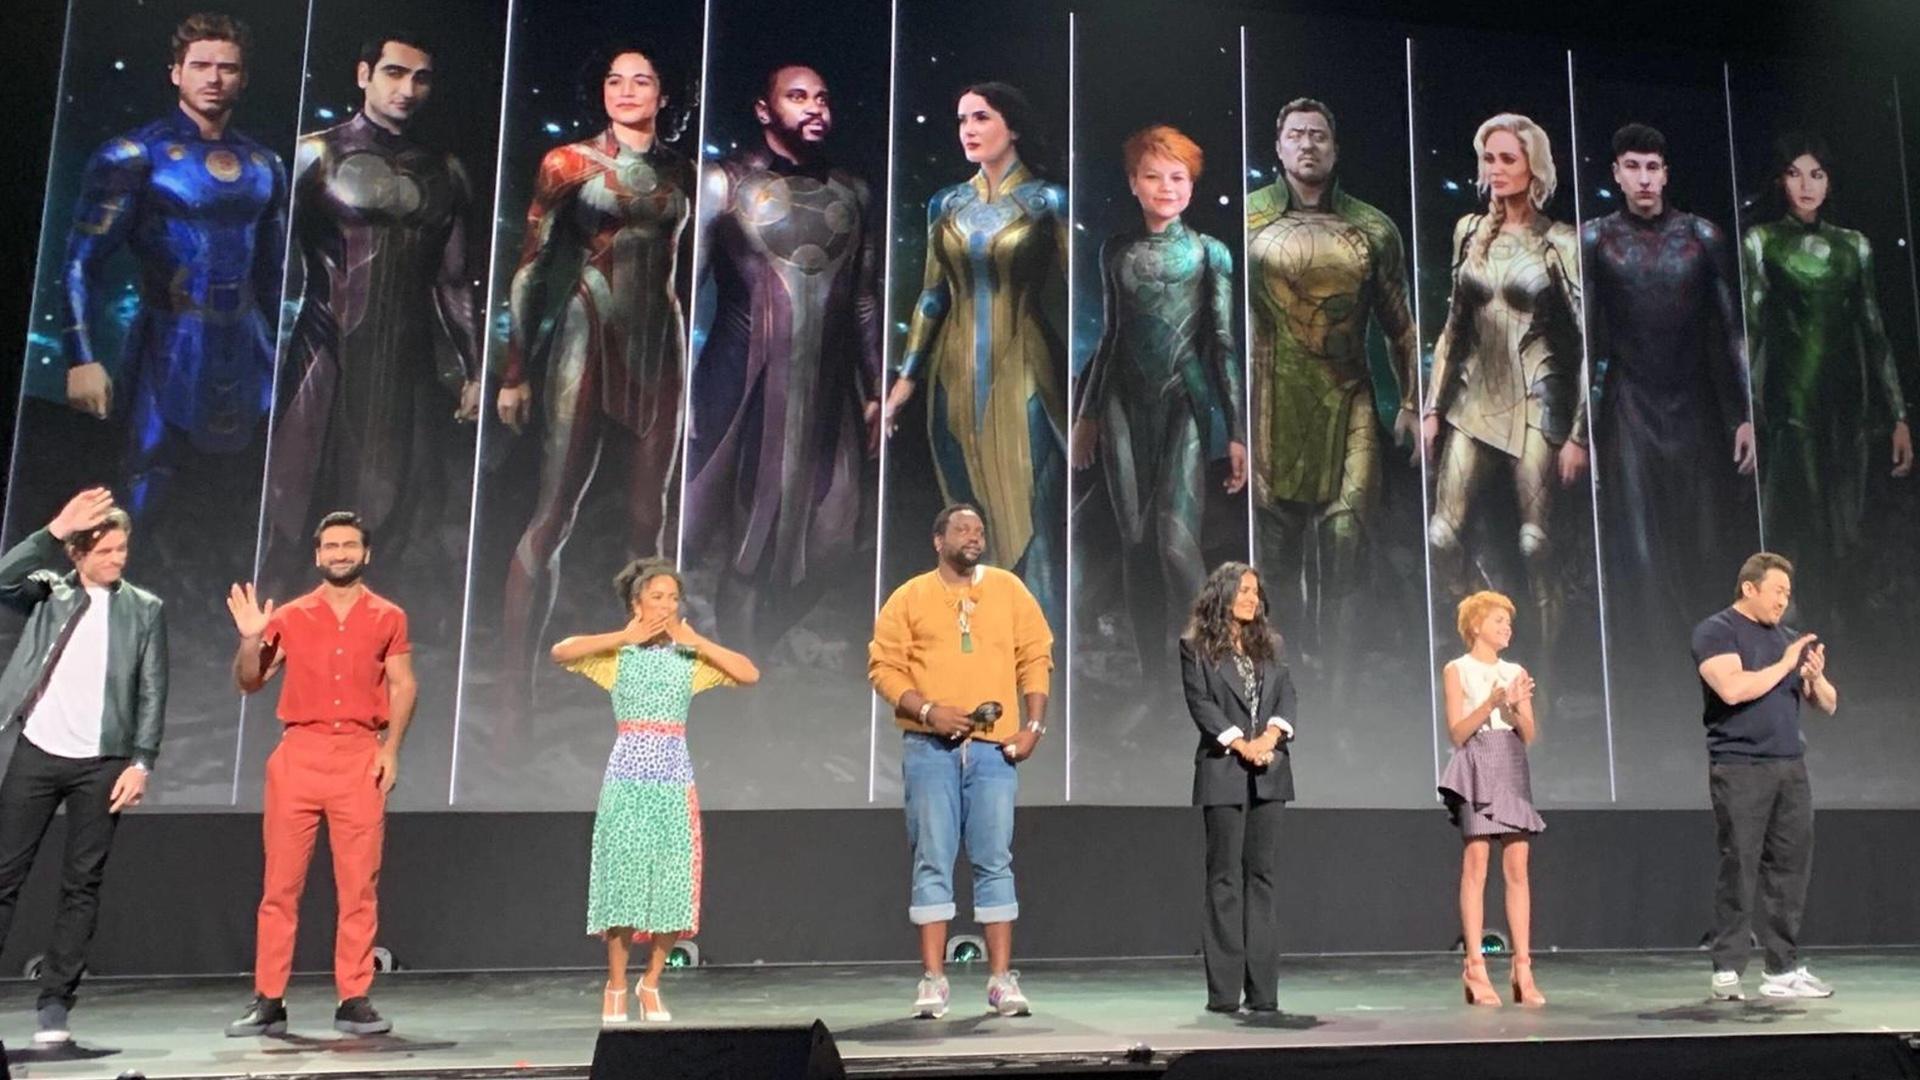 New Set Photo From Marvel's THE ETERNALS Show the Cast